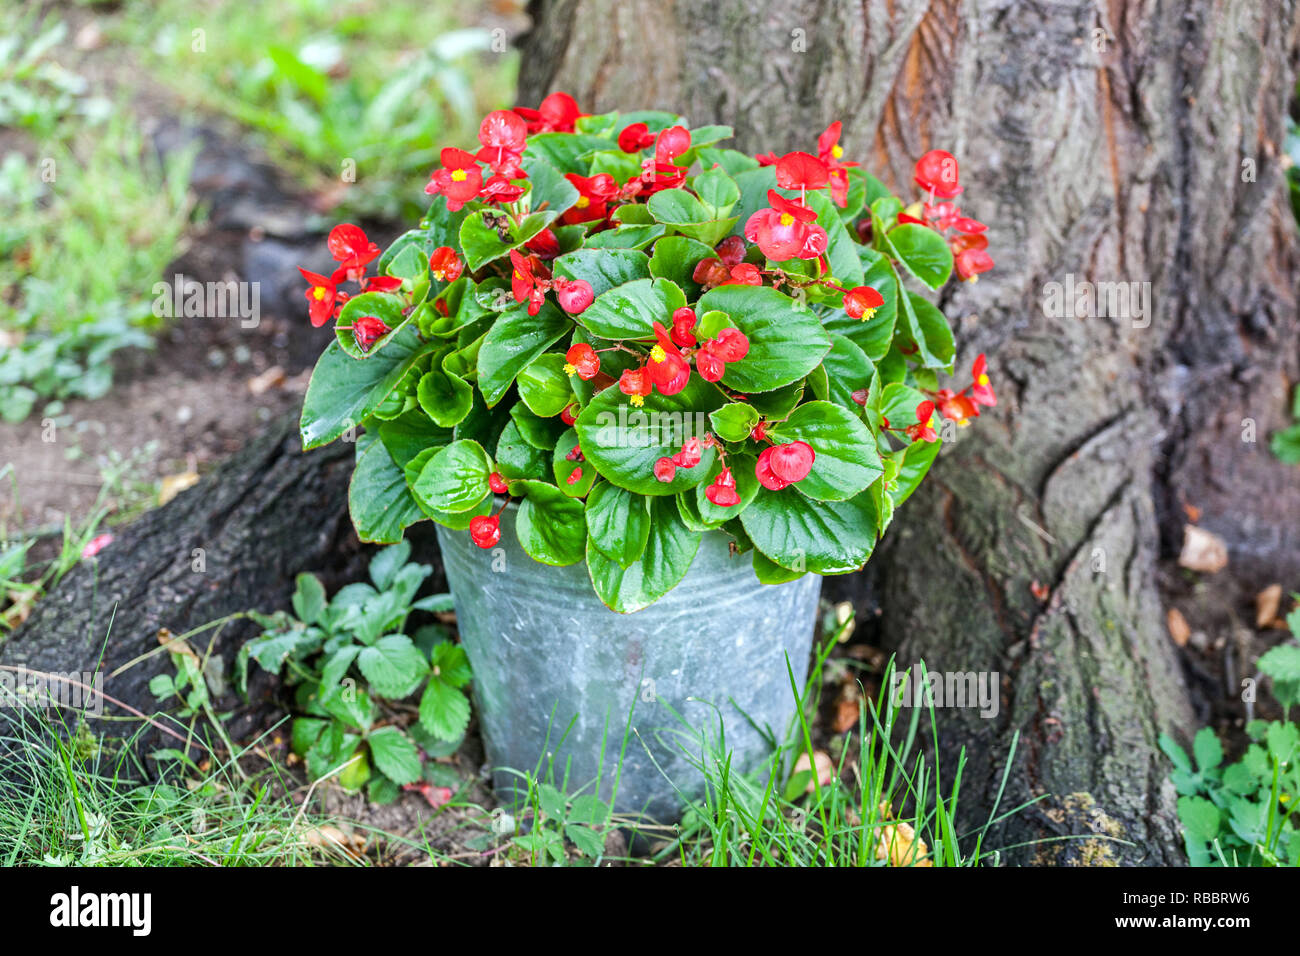 Begonia in a pot at a tree trunk, a garden Stock Photo